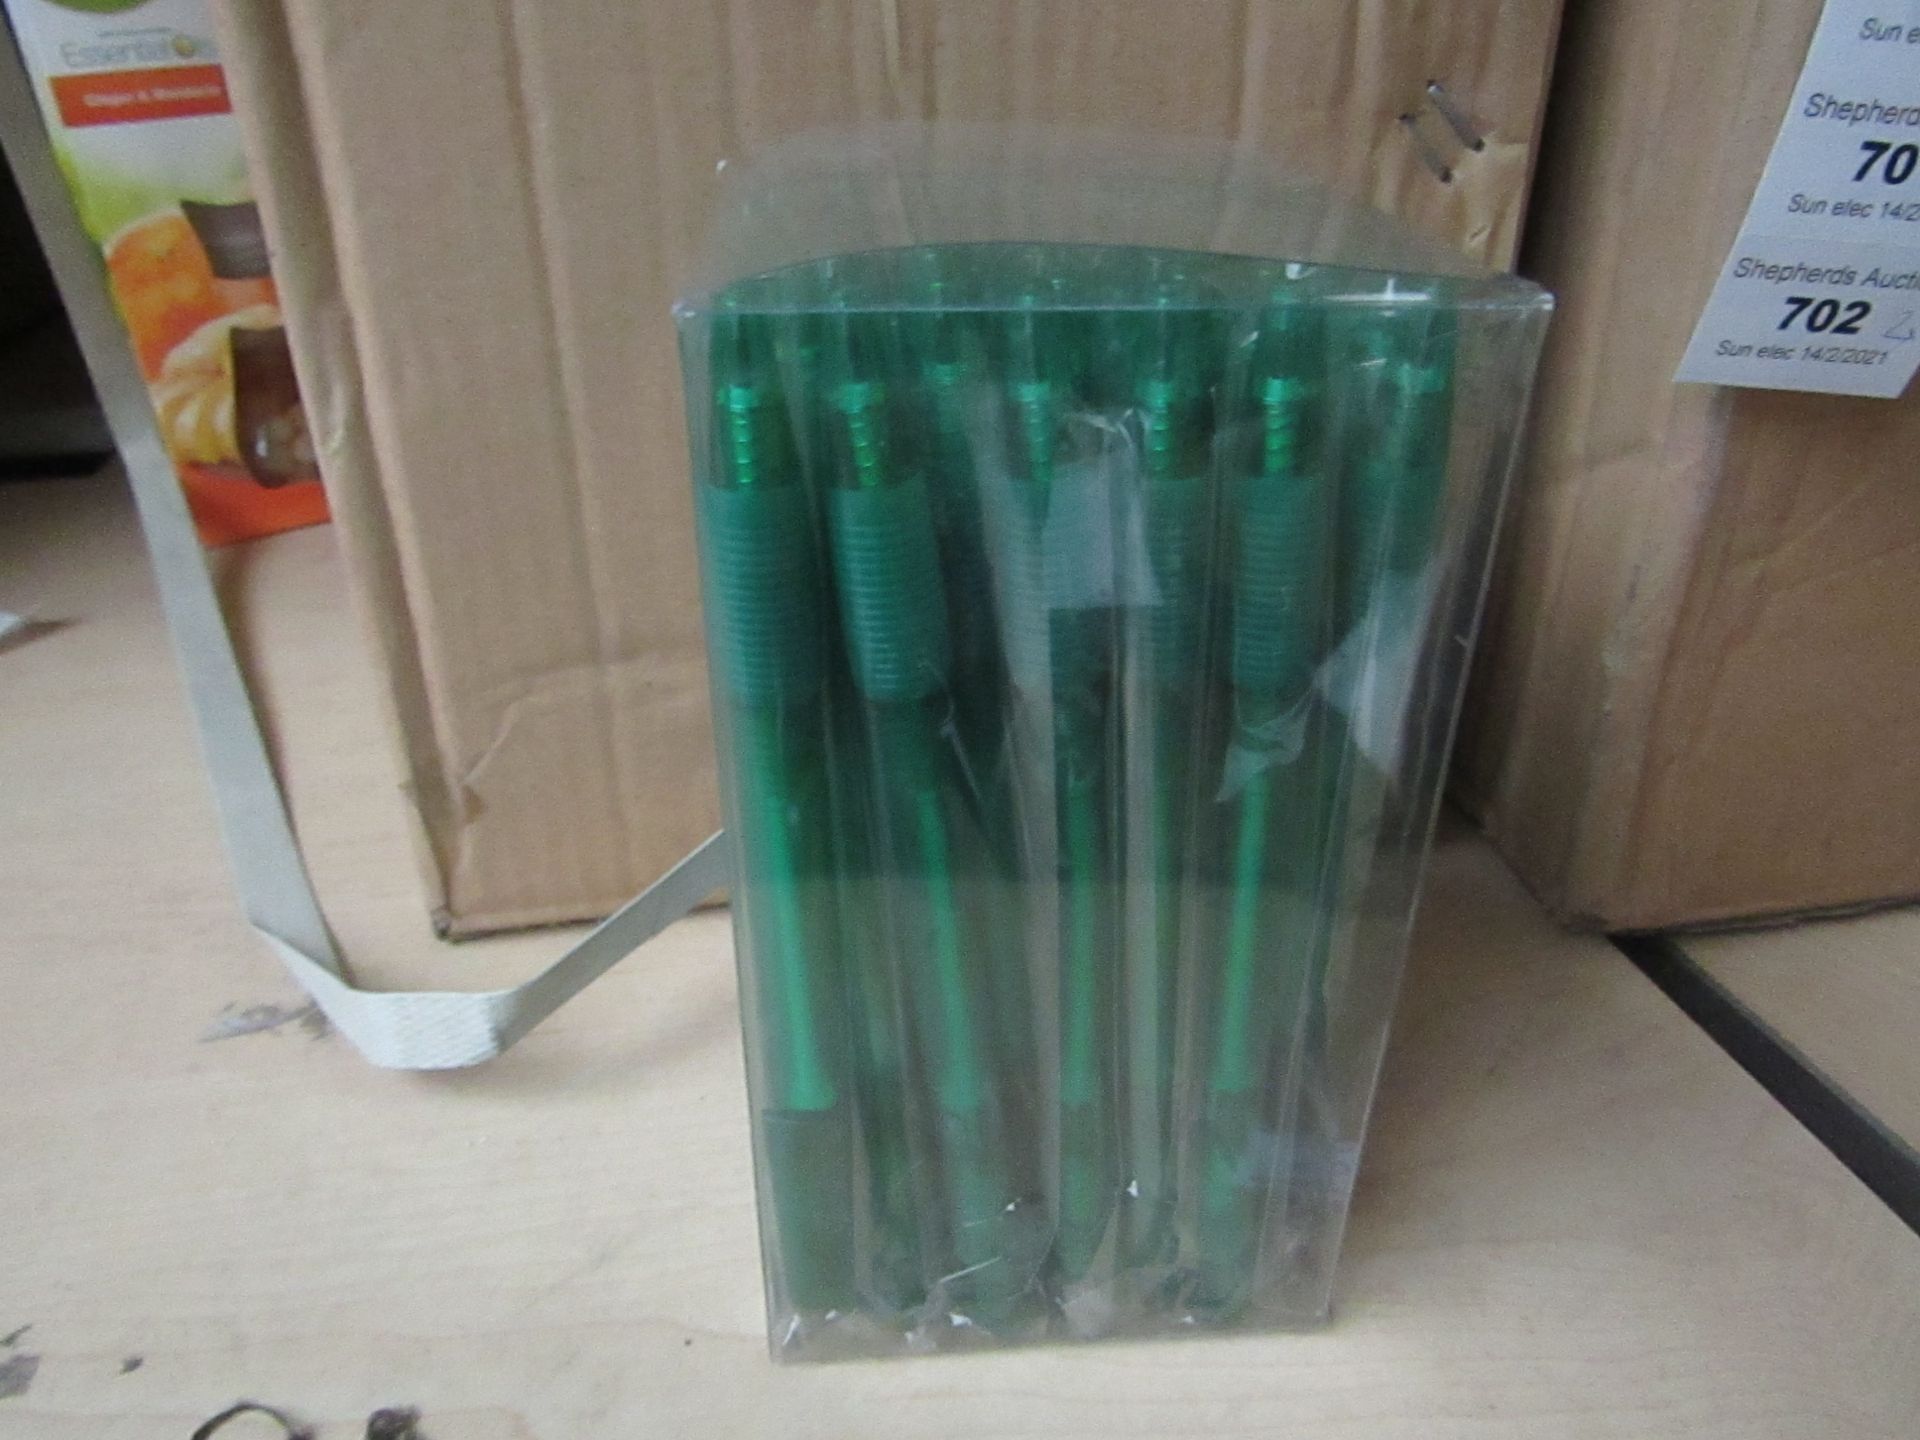 1x Box of Approx 50 Ball point Pens - Unused & Packaged.